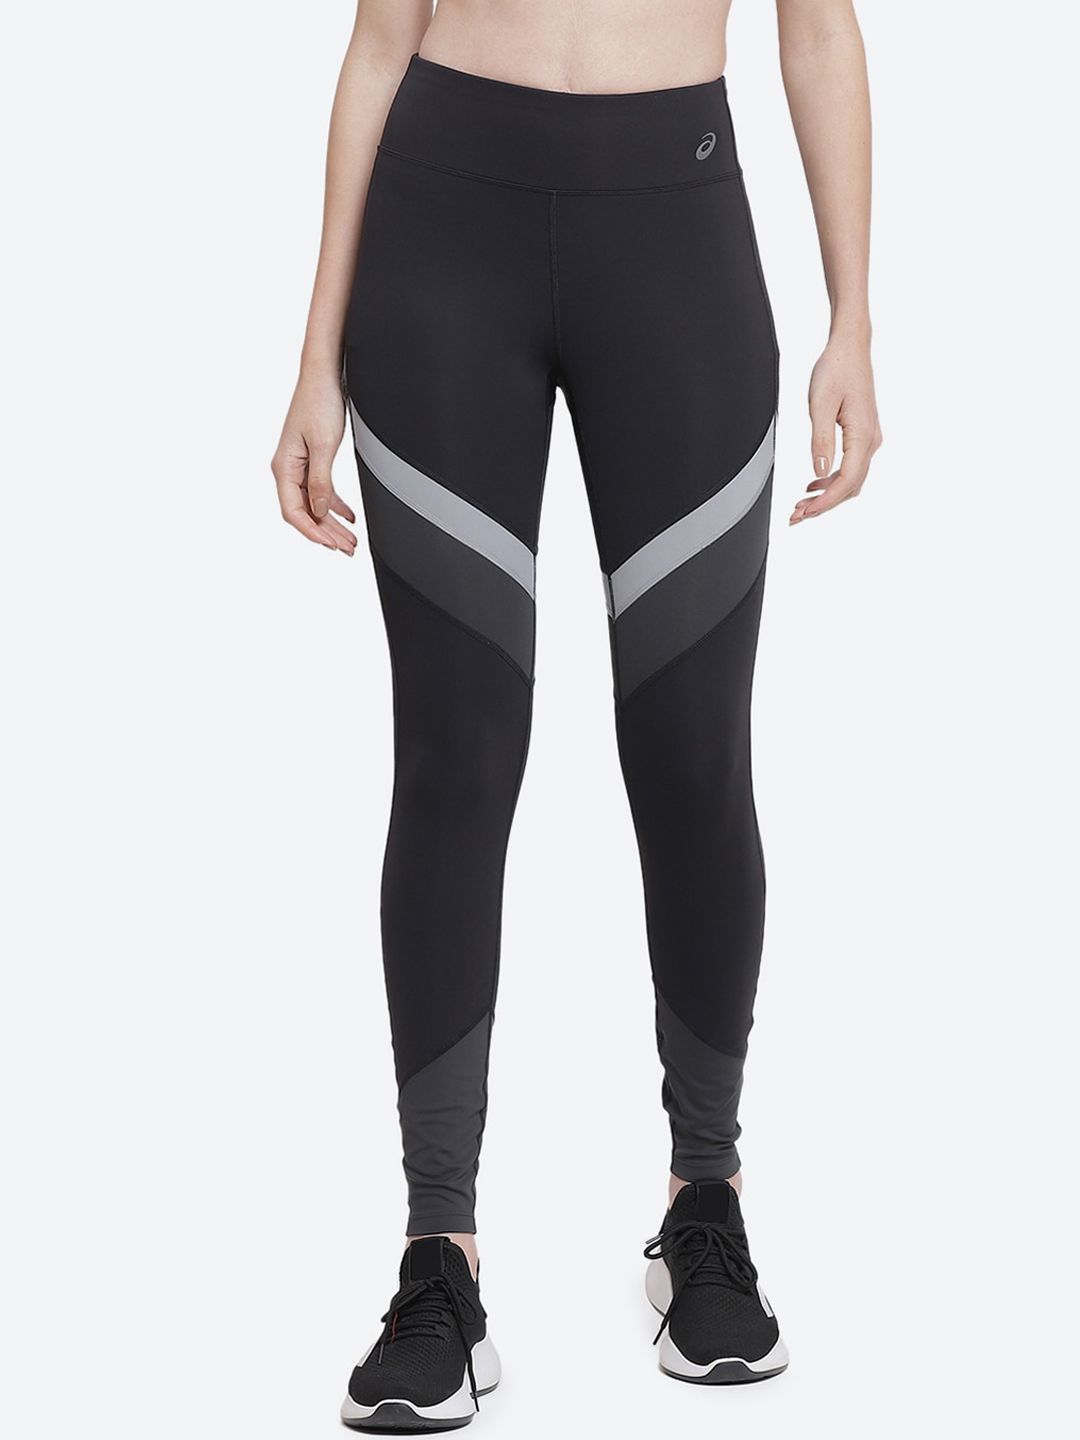 ASICS Women Black W Performance Tights Price in India